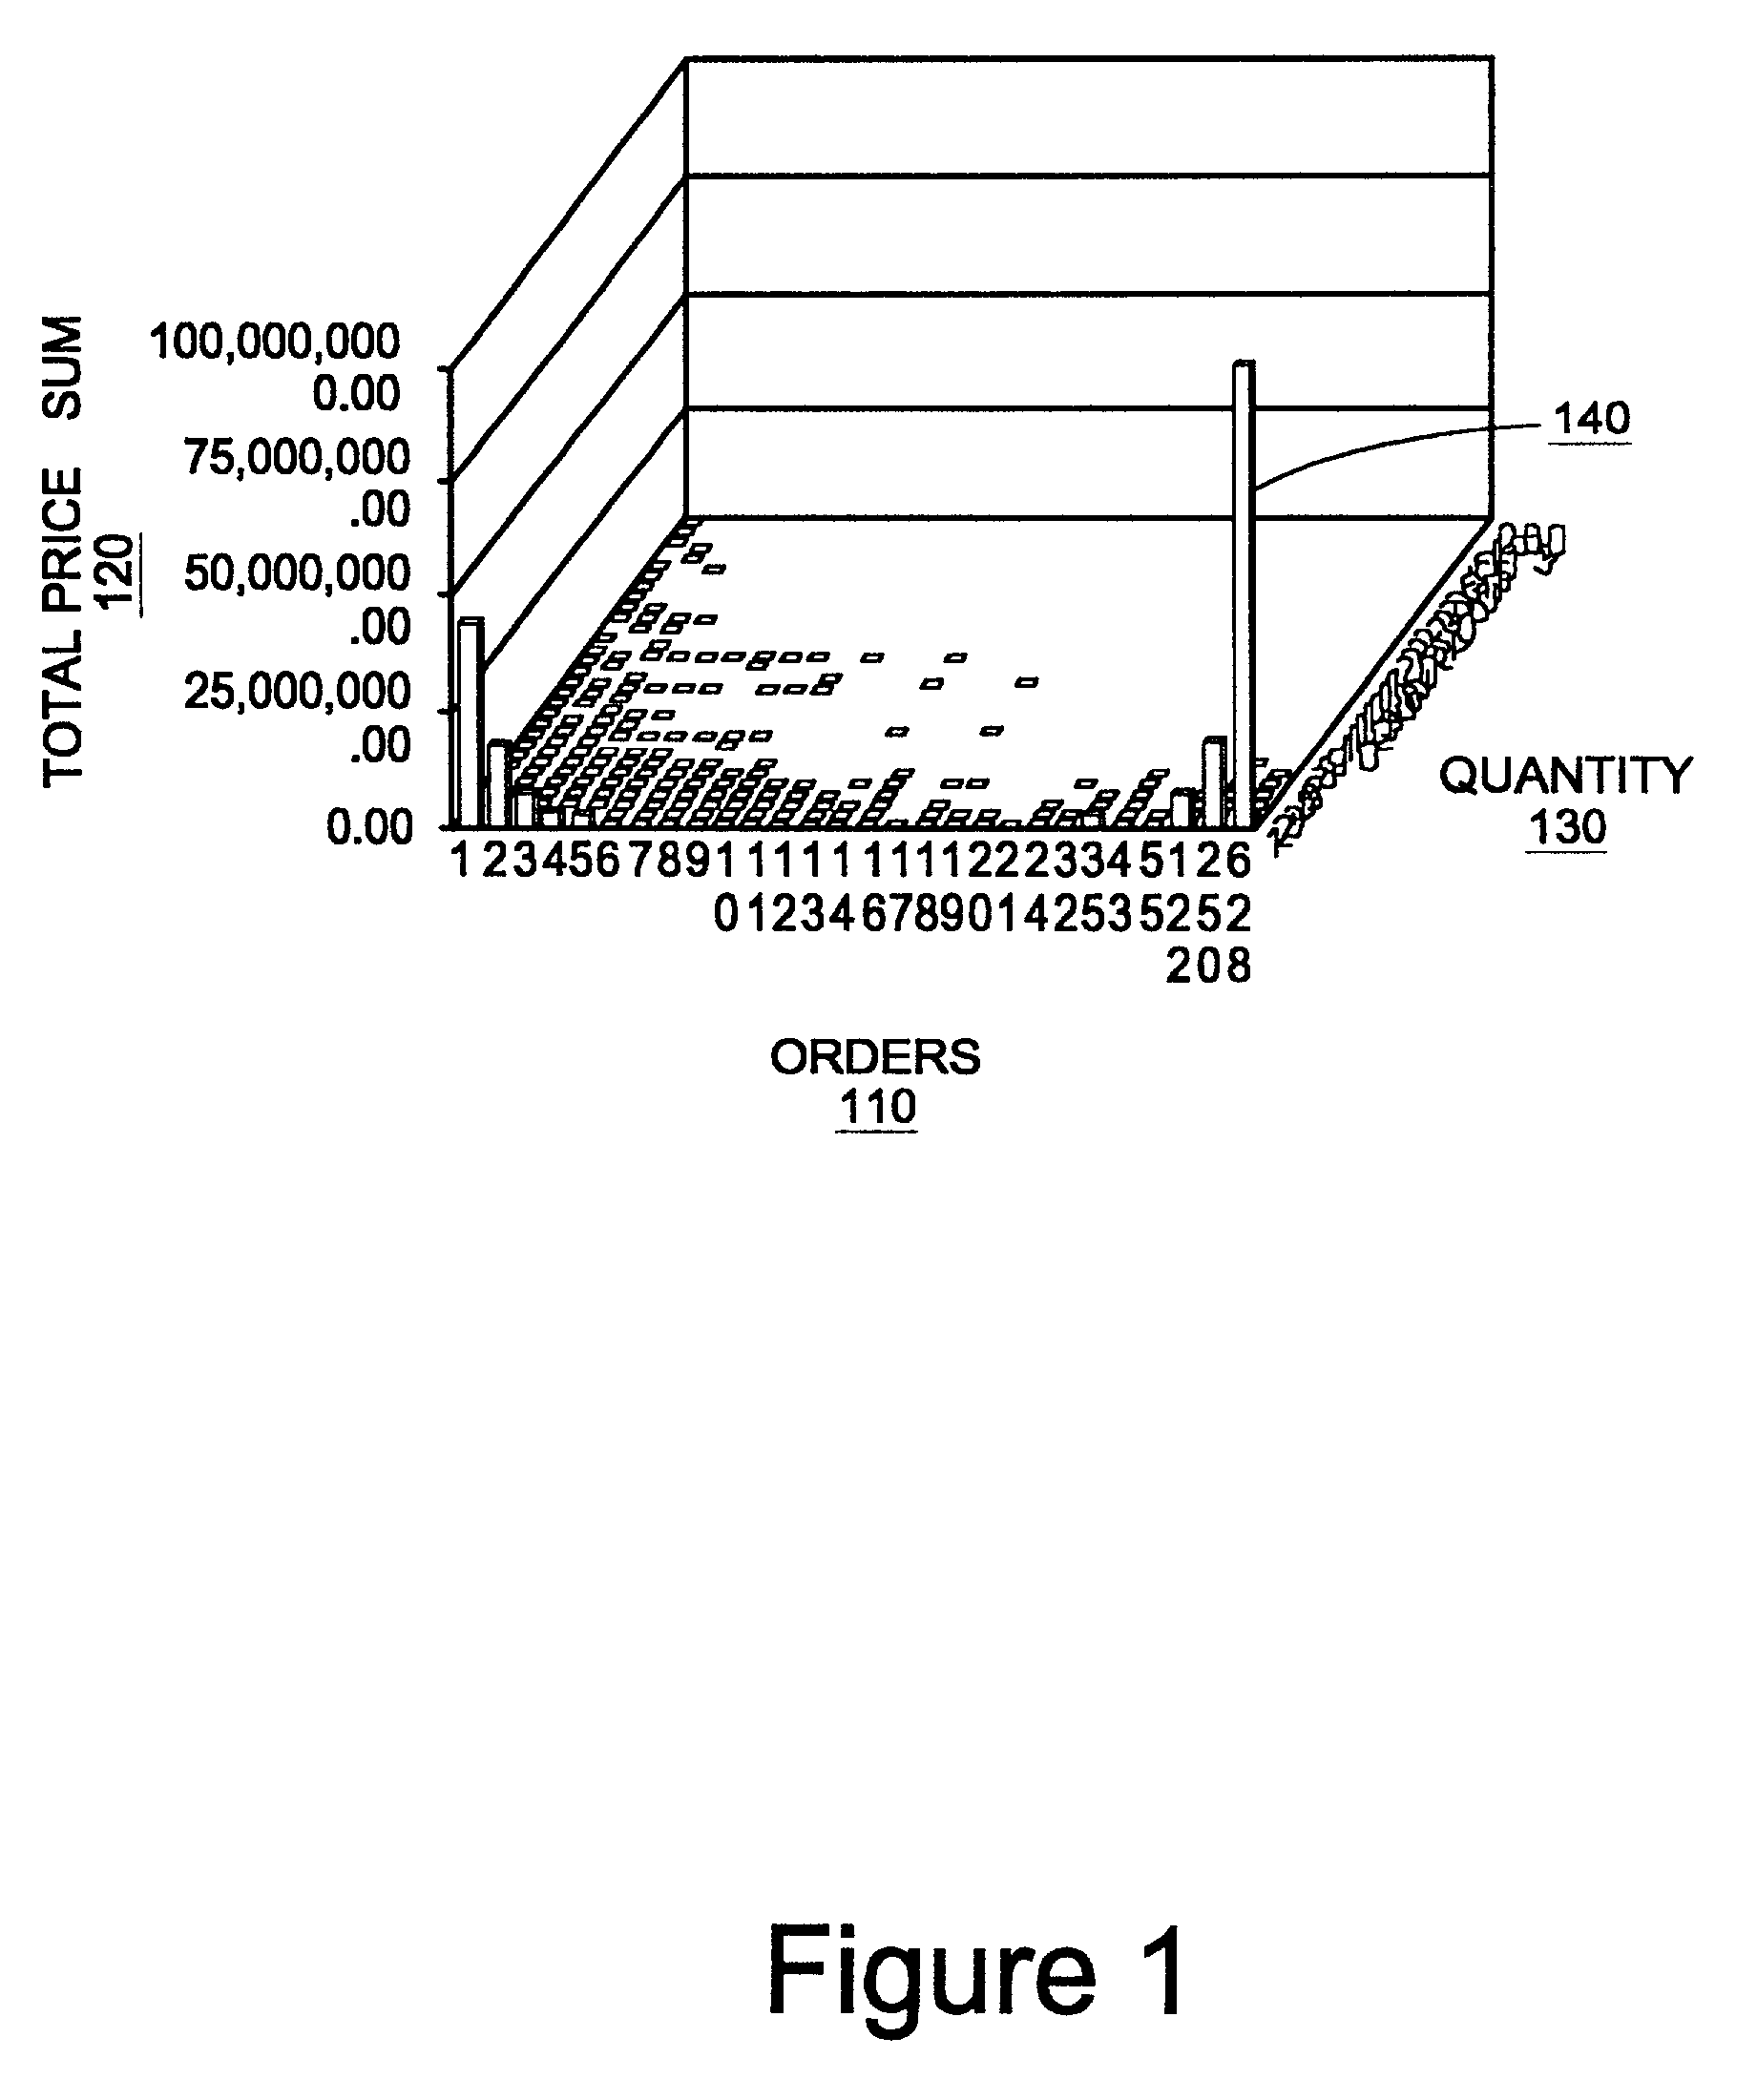 Method for visualizing large volumes of multiple-attribute data without aggregation using a pixel bar chart